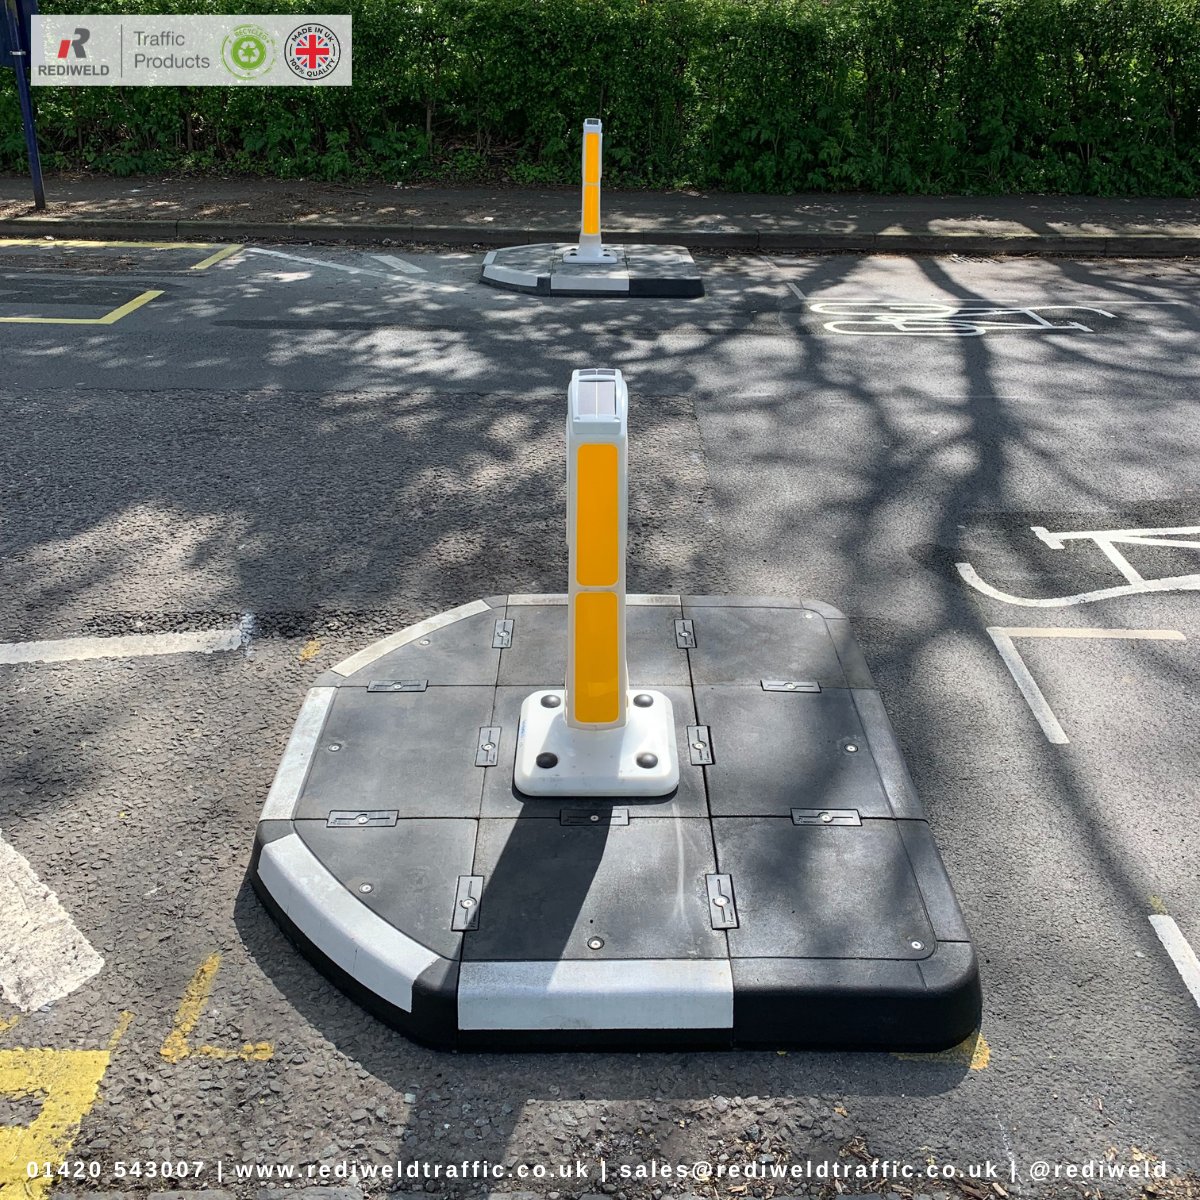 This innovative #trafficcalming project in #York uses our RediPave #TrafficIslands to create a narrower road space, allowing #cyclists to pass by securely while vehicles are required to wait at the Islands. ⚫#Recycledrubber ⚫#Modular system ⚫Bolt down bit.ly/3GdaRi3